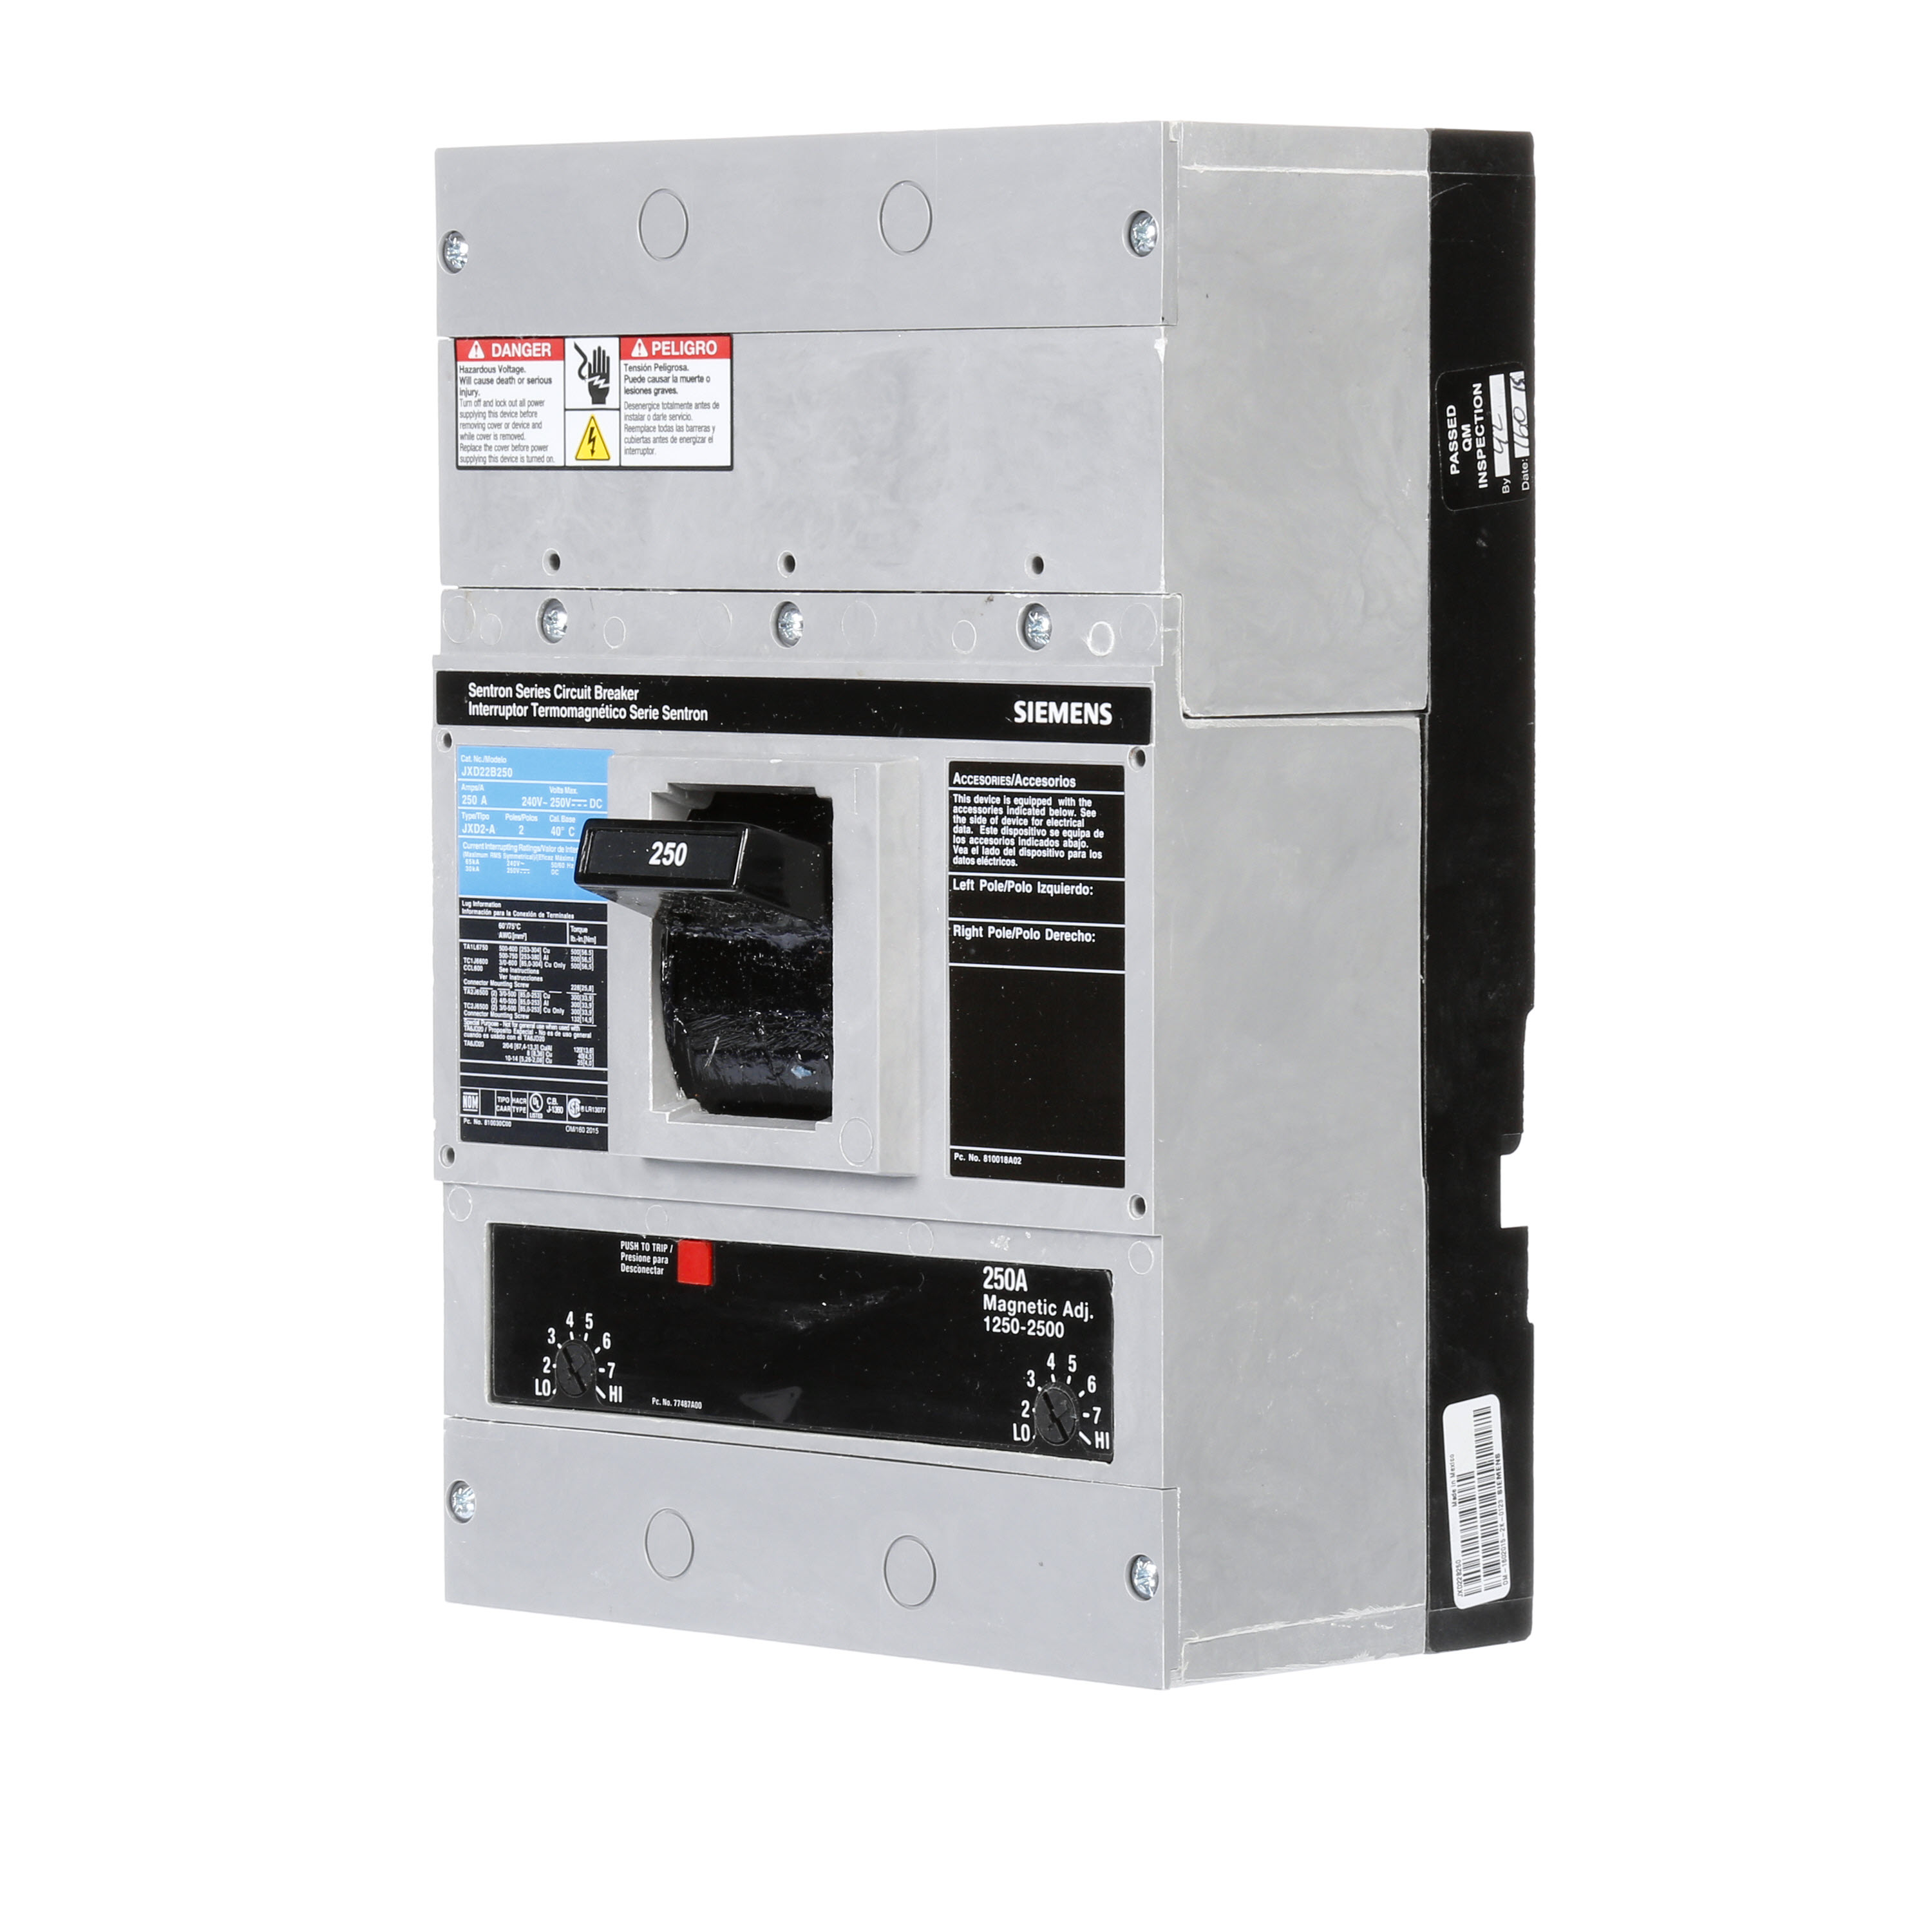 SIEMENS LOW VOLTAGE SENTRON MOLDED CASE CIRCUIT BREAKER WITH THERMAL - MAGNETICTRIP UNIT. ASSEMBLED STANDARD 40 DEG C BREAKER JD FRAME WITH STANDARD BREAKING CAPACITY. 250A 2-POLE (65KAIC AT 240V). NON-INTERCHANGEABLE TRIP UNIT. SPECIAL FEATURES NO LUGS INSTALLED. DIMENSIONS (W x H x D) IN 7.50 x 11.0 x 4.00.